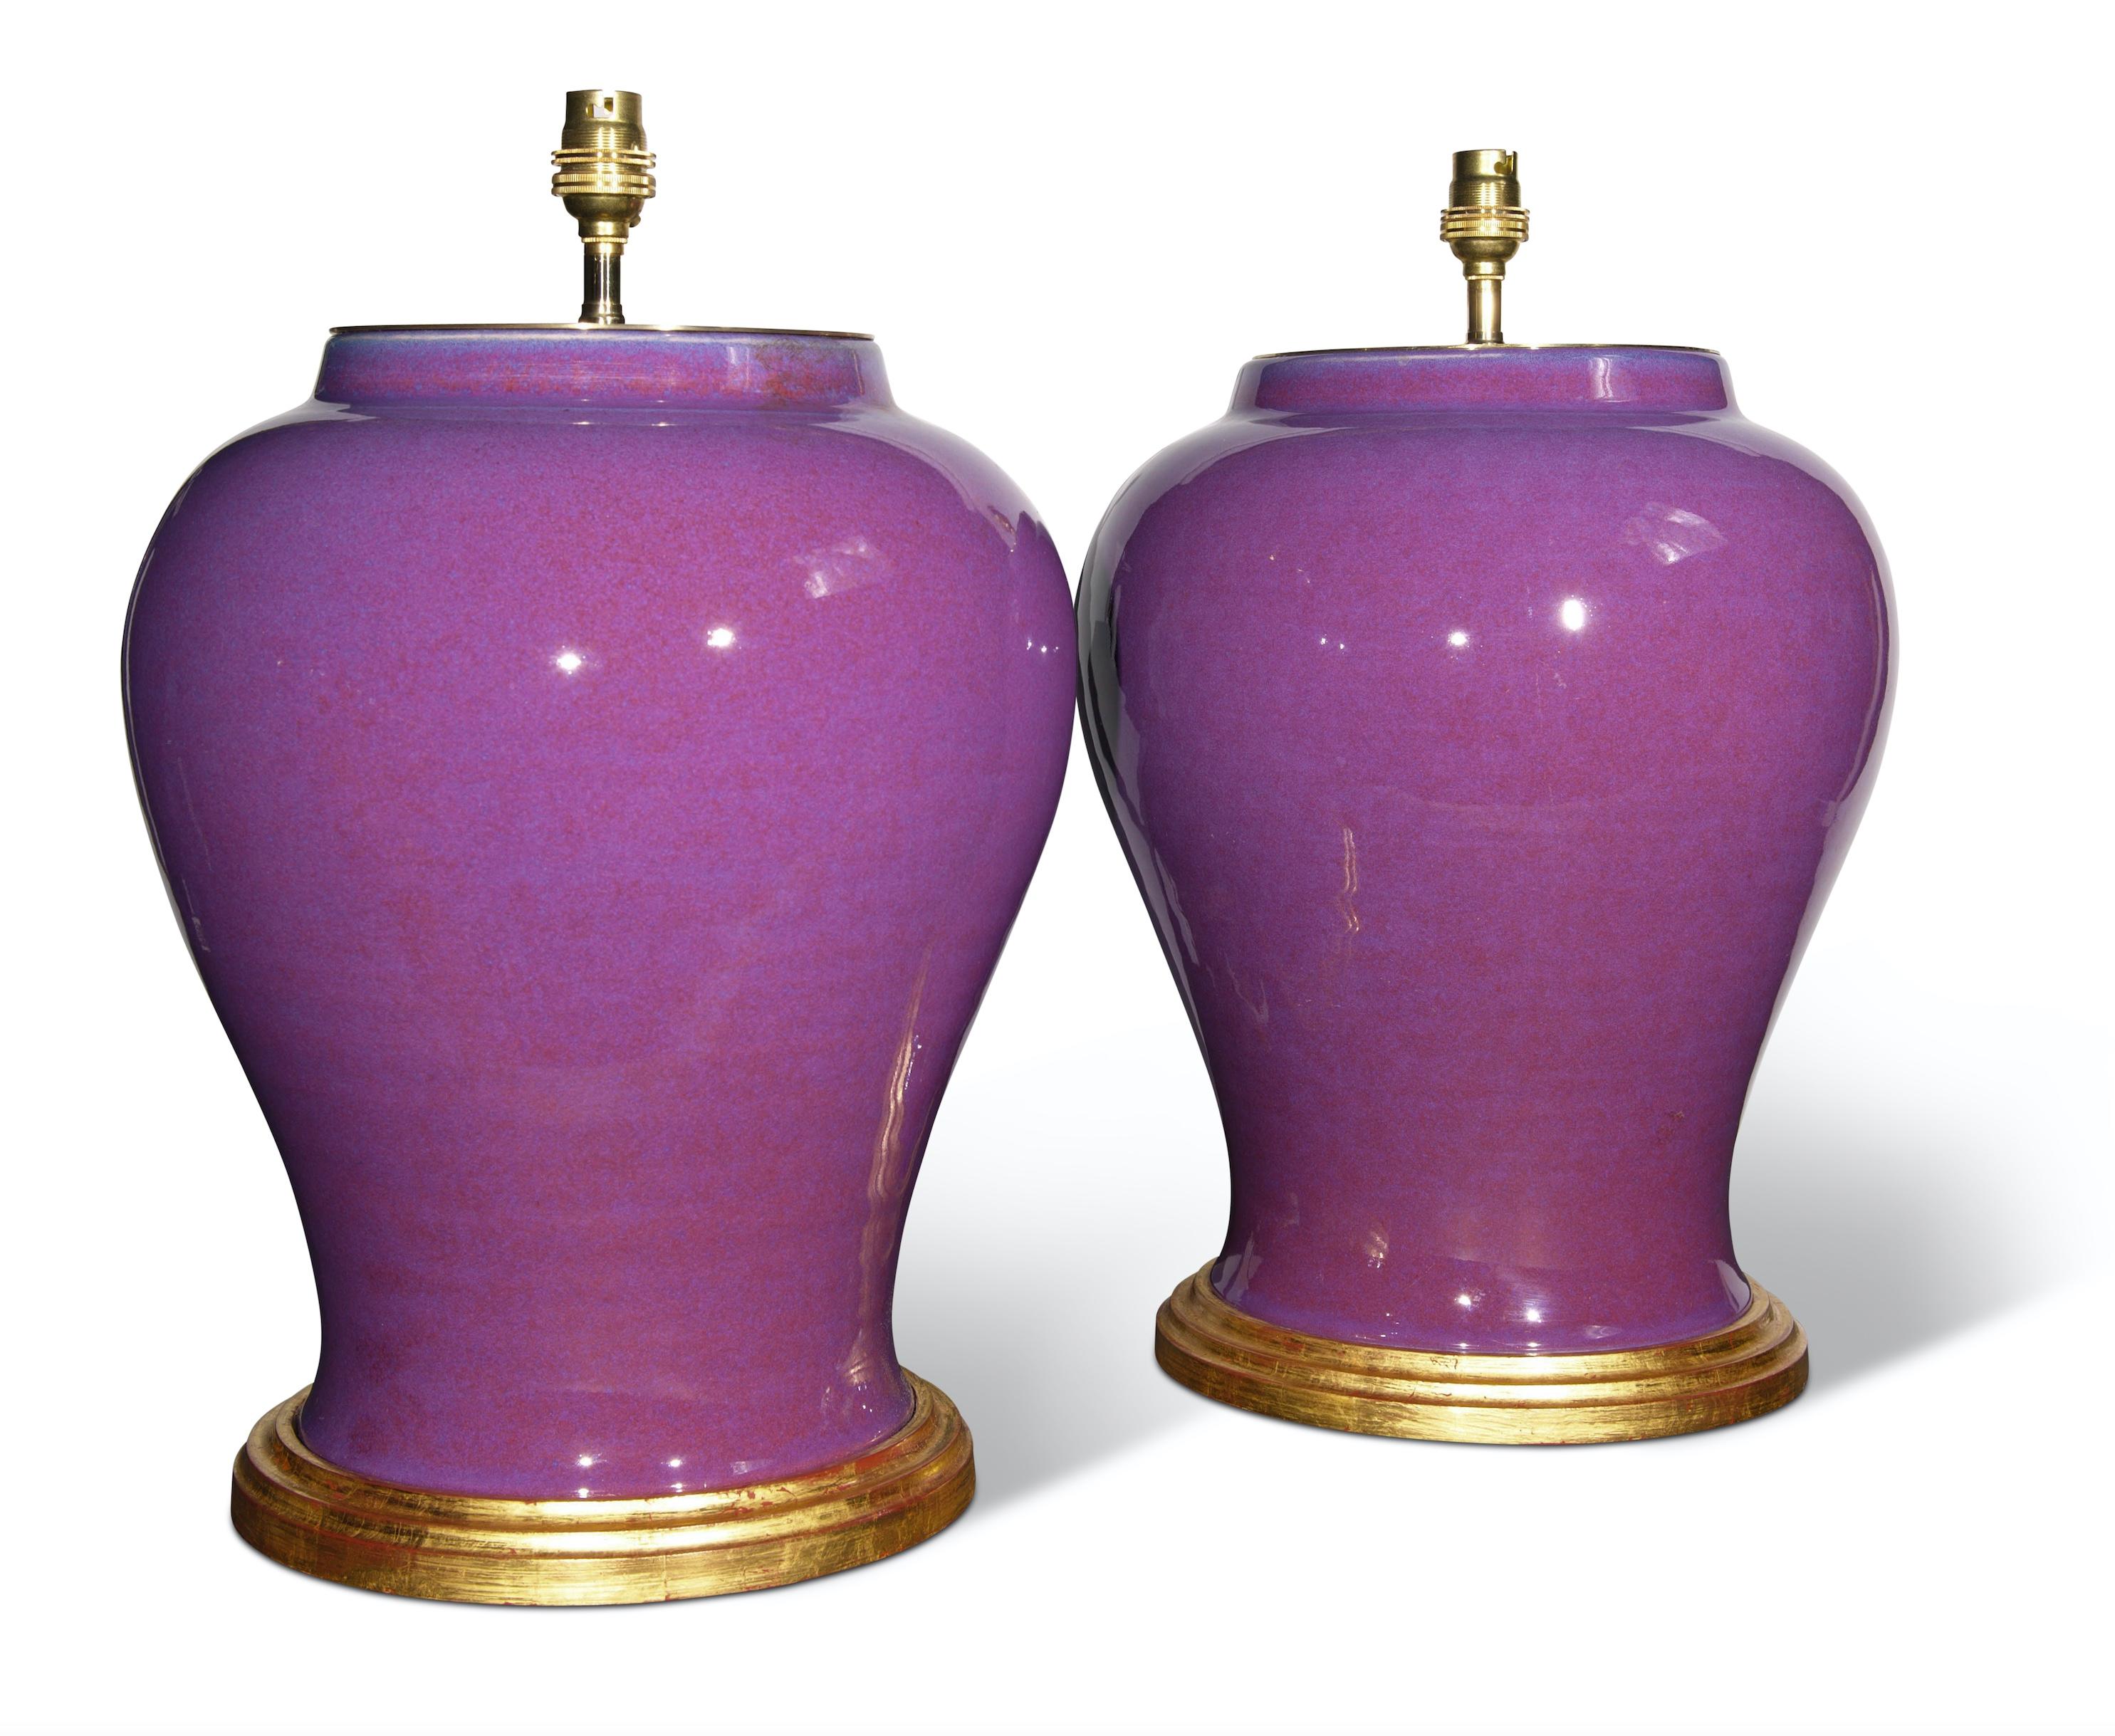 A superb pair of Mid-20th Century French porcelain vases, with a wonderful plum purple glaze, now mounted as lamps with hand gilded turned bases.

Height of vases: 14 1/2 in (37 cm) including giltwood bases, excluding electrical fitments and